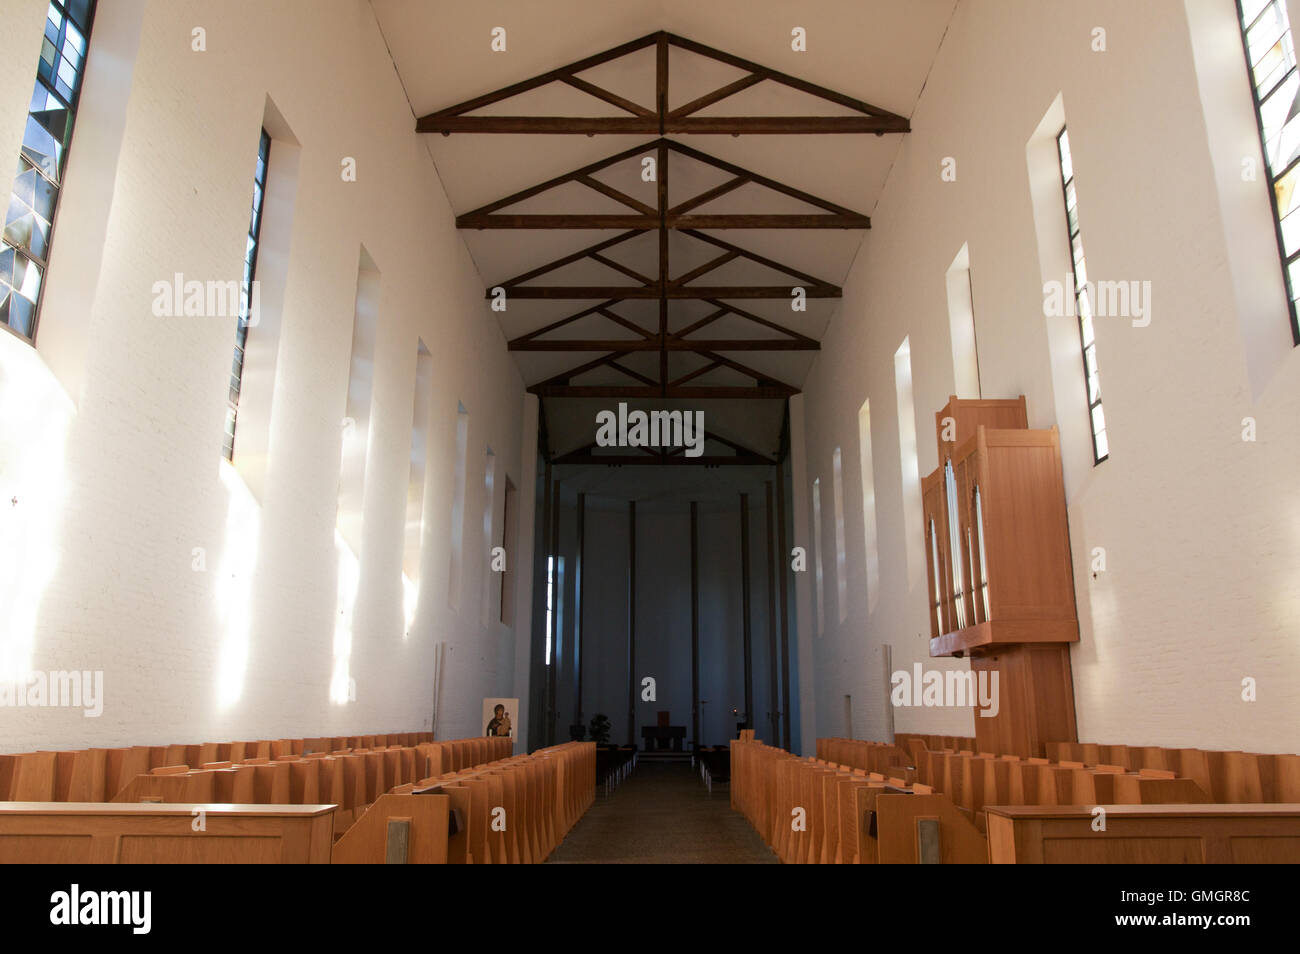 Interior of the Abbey of Gethsemani, a Trappist monastery in Kentucky Stock Photo